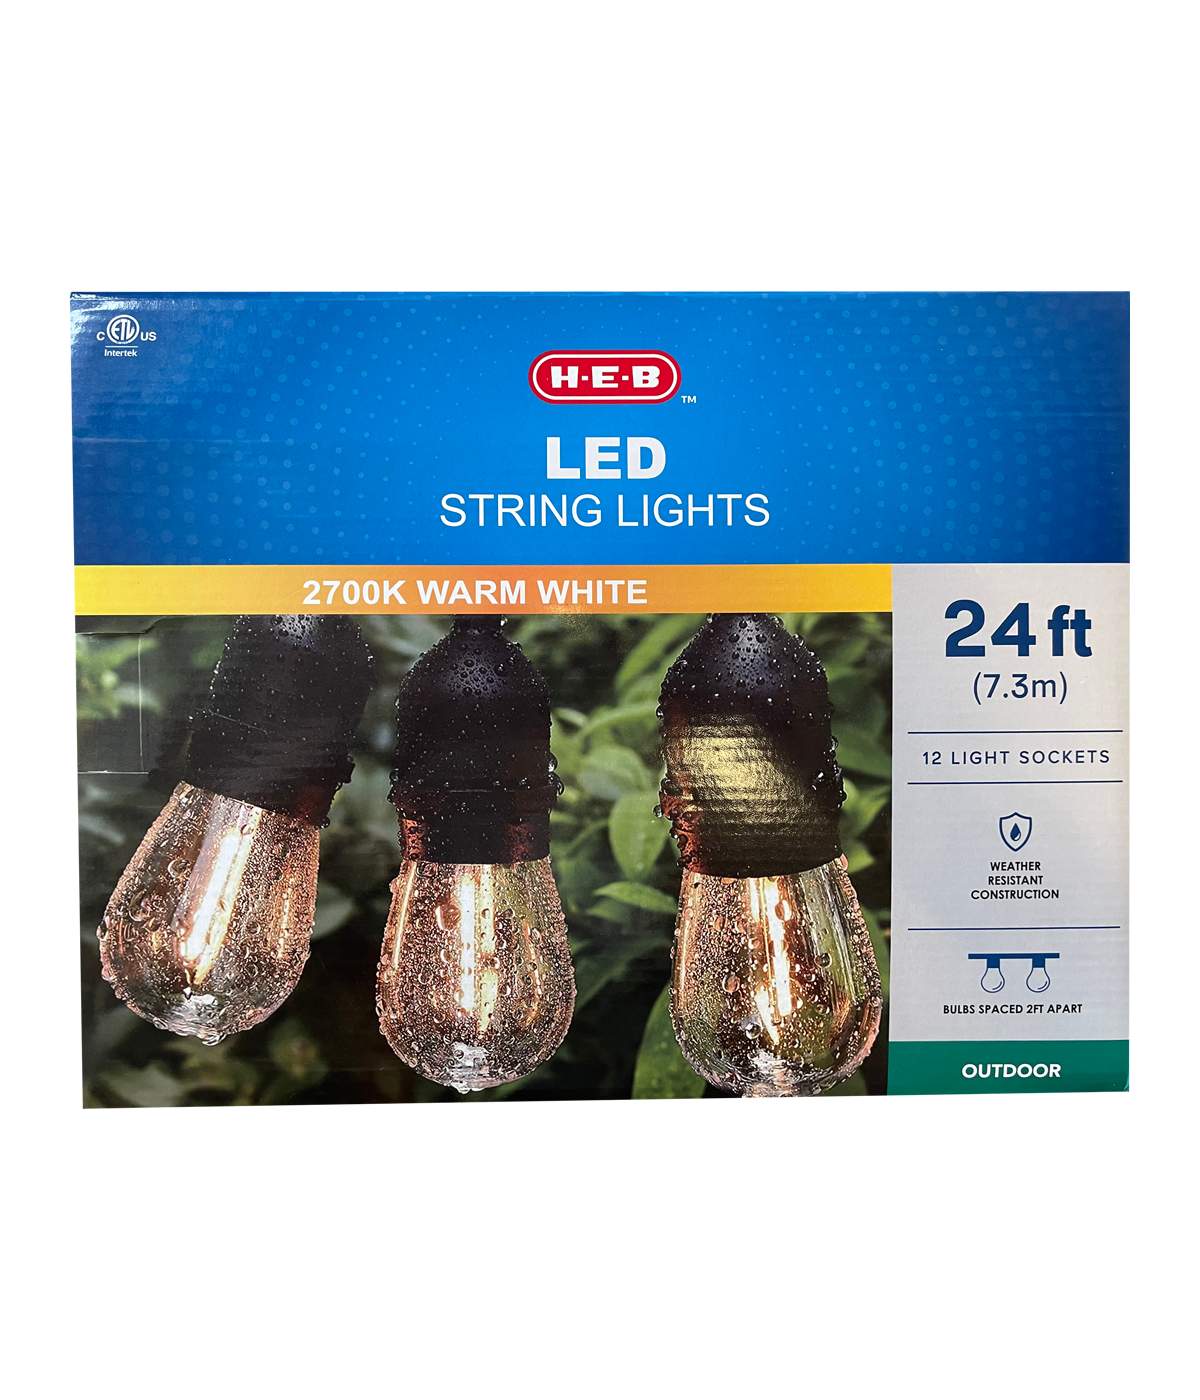 H-E-B LED Outdoor String Lights - Warm White; image 2 of 4